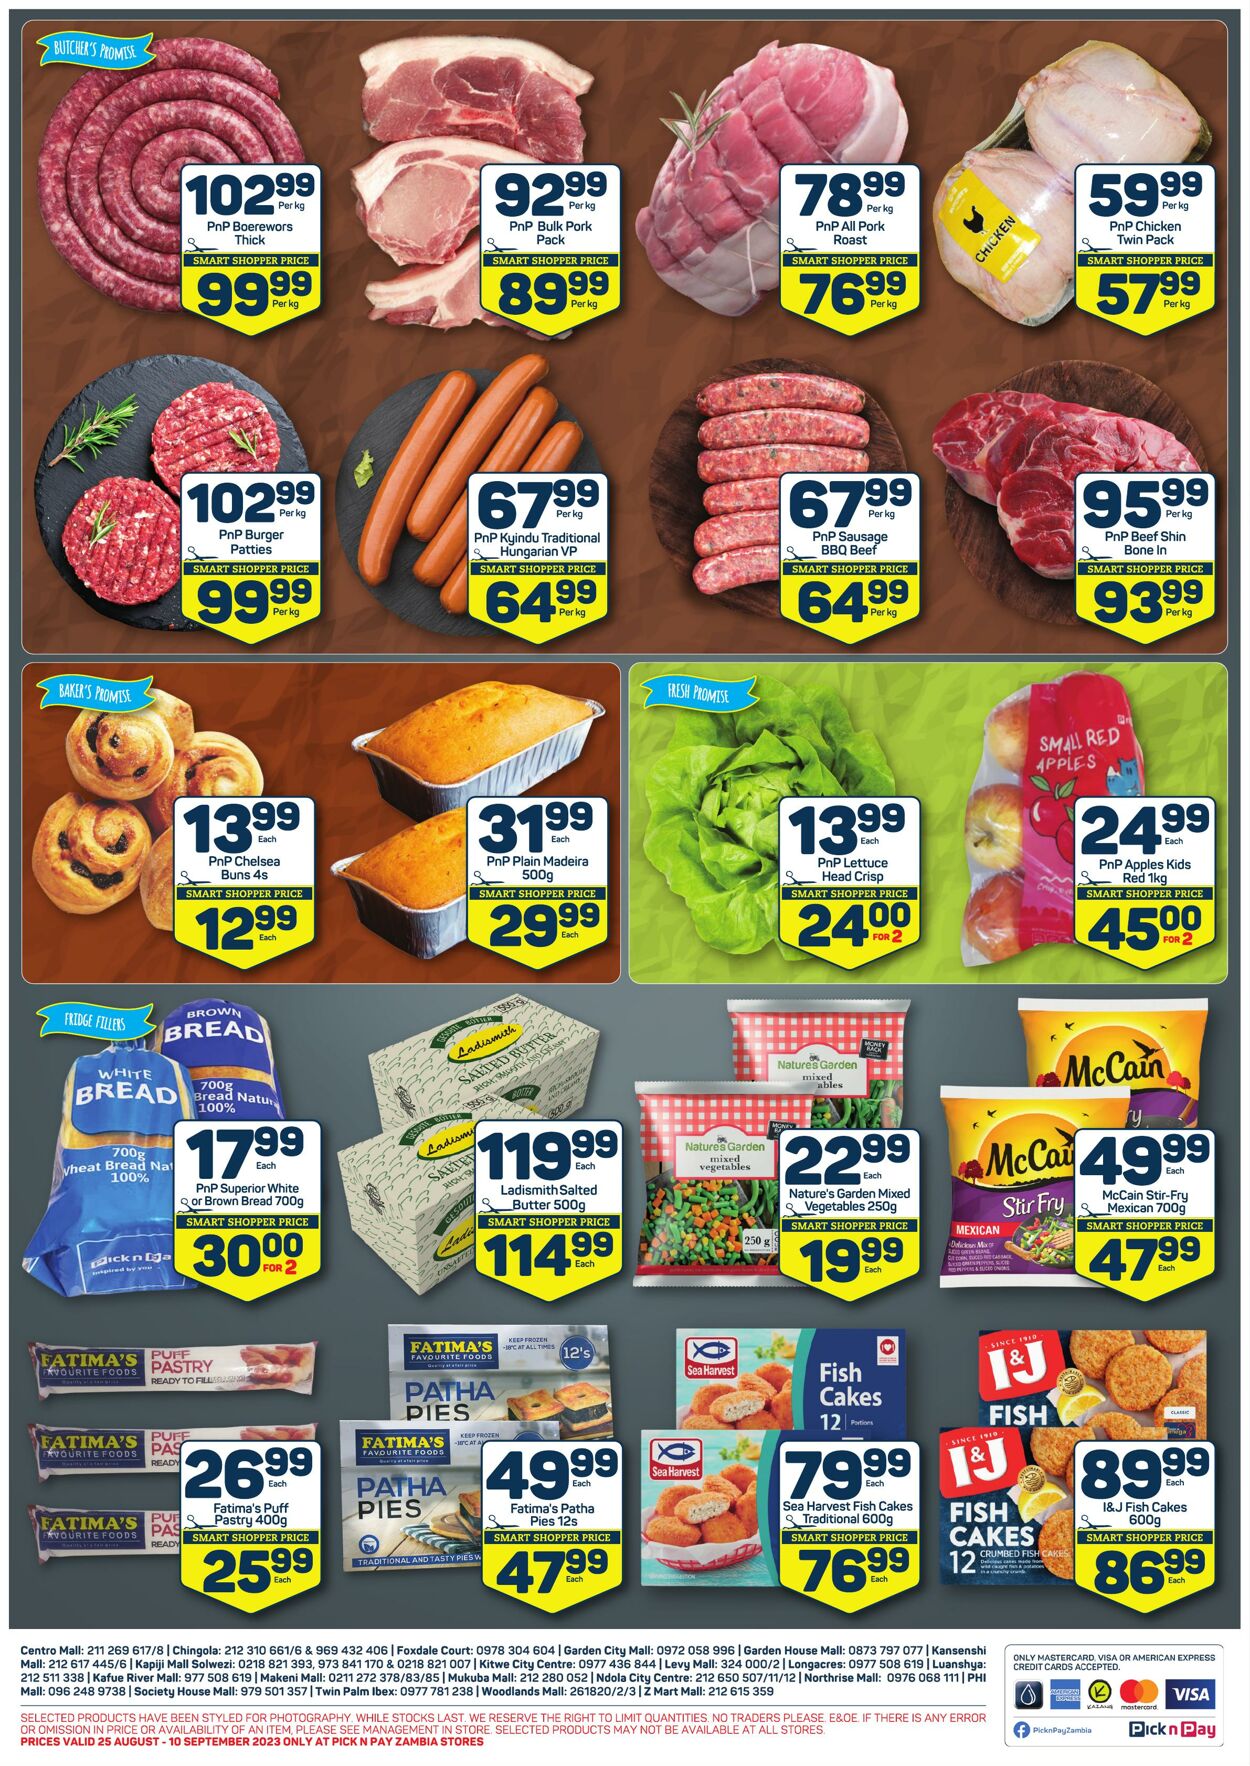 Special Pick n Pay 07.09.2023 - 10.09.2023